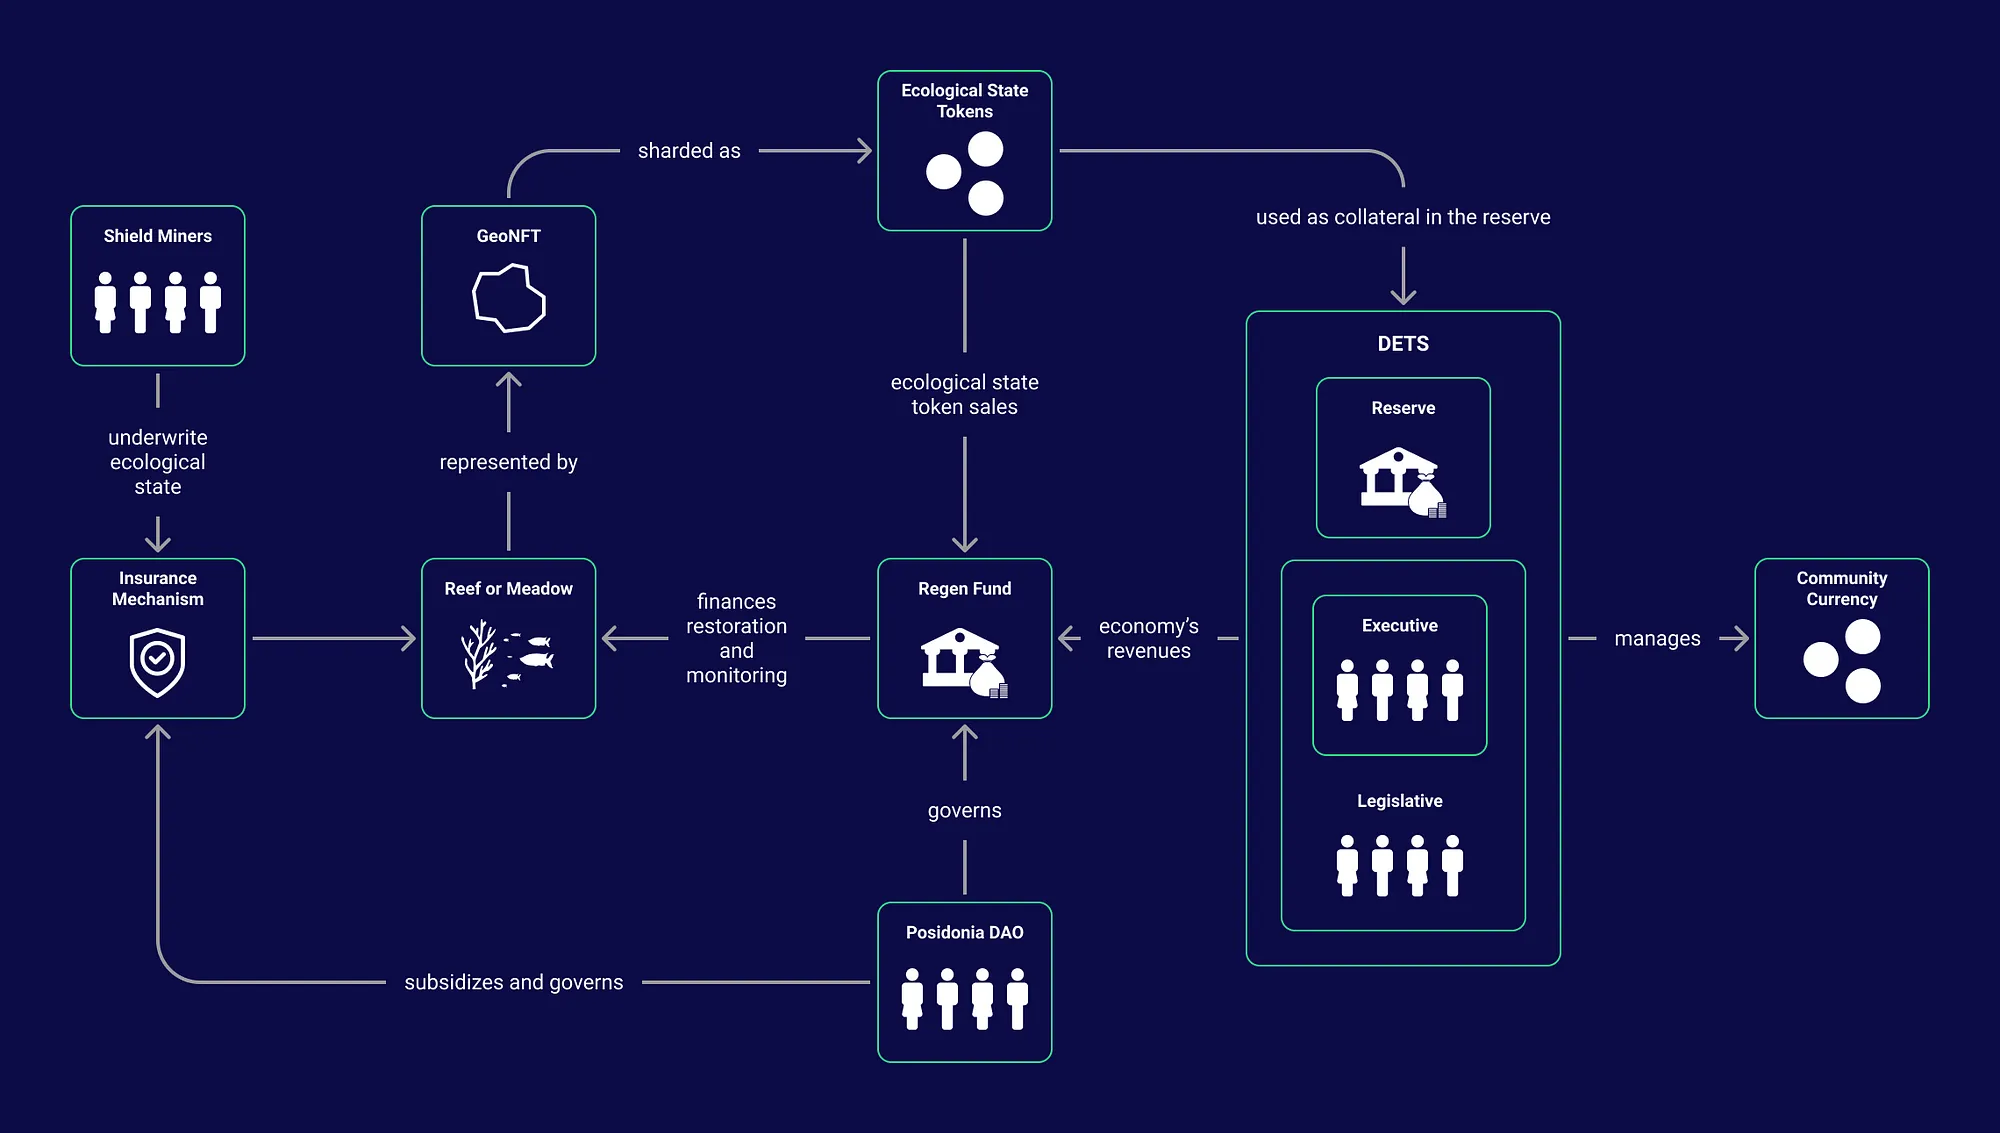 Schematic of a proposed cryptoeconomic system for maritime regeneration by Curve Labs. Posidonia tokens would grant governance rights over a DAC treasury—The Regen Fund—whose mission is to fund the protection and restoration of seagrass meadows and reefs in the Mediterranean sea. While in this context, the tokens enable control and effective environmental governance of rare and crucial natural assets.The governance tokens would simultaneously be datatokens for collected seagrass ecological state data by the NAC. Highlighting Web3’s composability, the tokens could be used as collateral to power a seagrass-backed currency governed by a larger, territorial-level entity—a decentralized exchange trading system (DETS). Alternatively, the Posidonia tokens could be utilized as part of a parametric insurance mechanism that rewards underwriters—shield miners—by streaming Posidonia tokens. The smart control parameters for the insurance, such as the reward issuance rate, could be set by token holders, or a delegate on their behalf.Source: Usage of this System Design by Louise Borreani has been authorized by the copyright holder. 